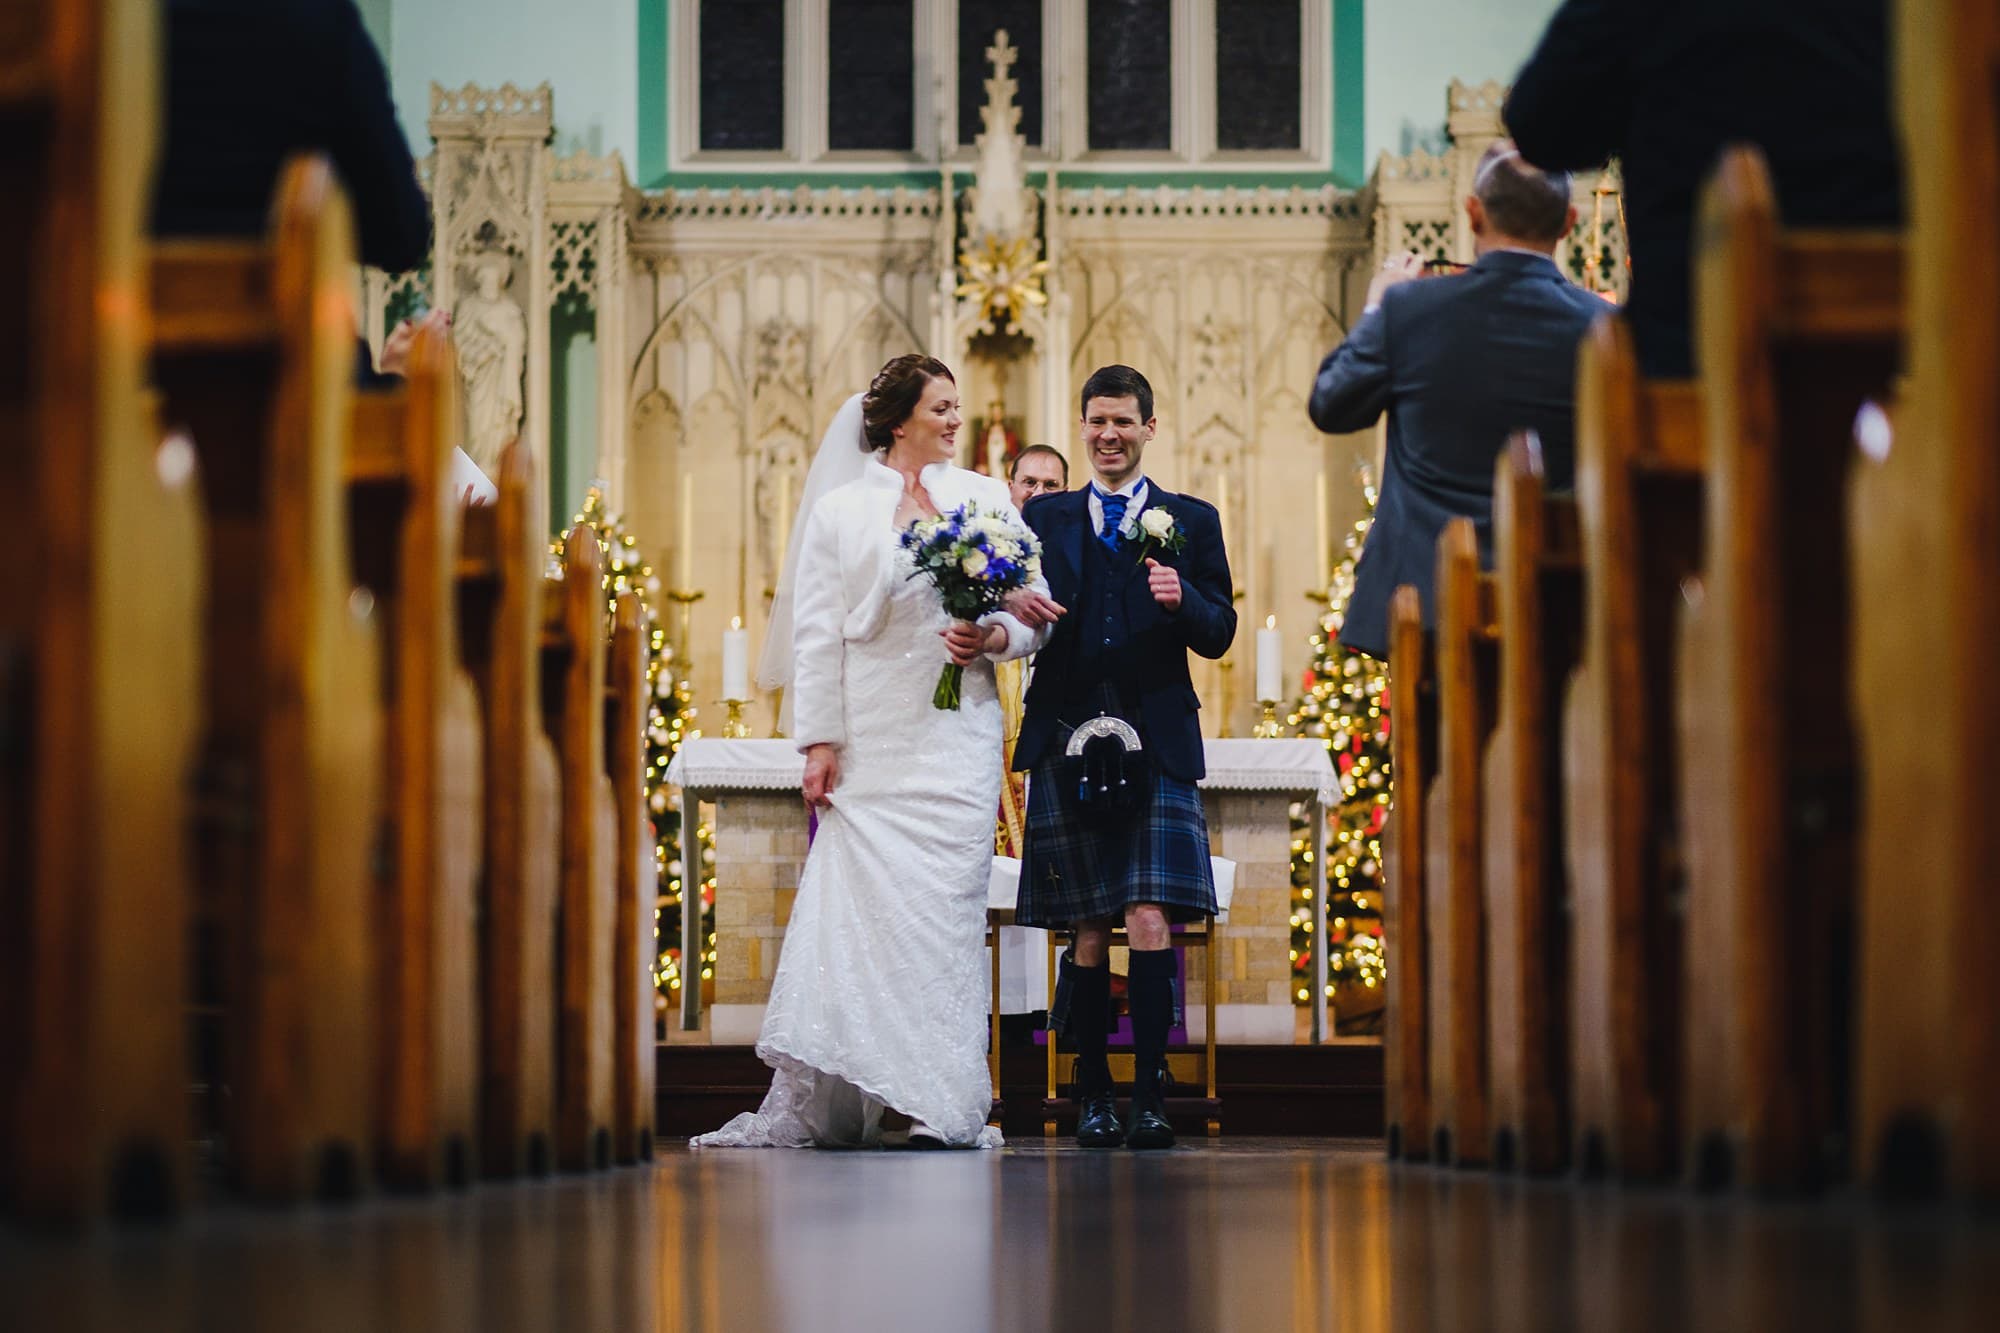 a low-angle wedding photograph showing a grinning bride and groom walking down the aisle after getting married